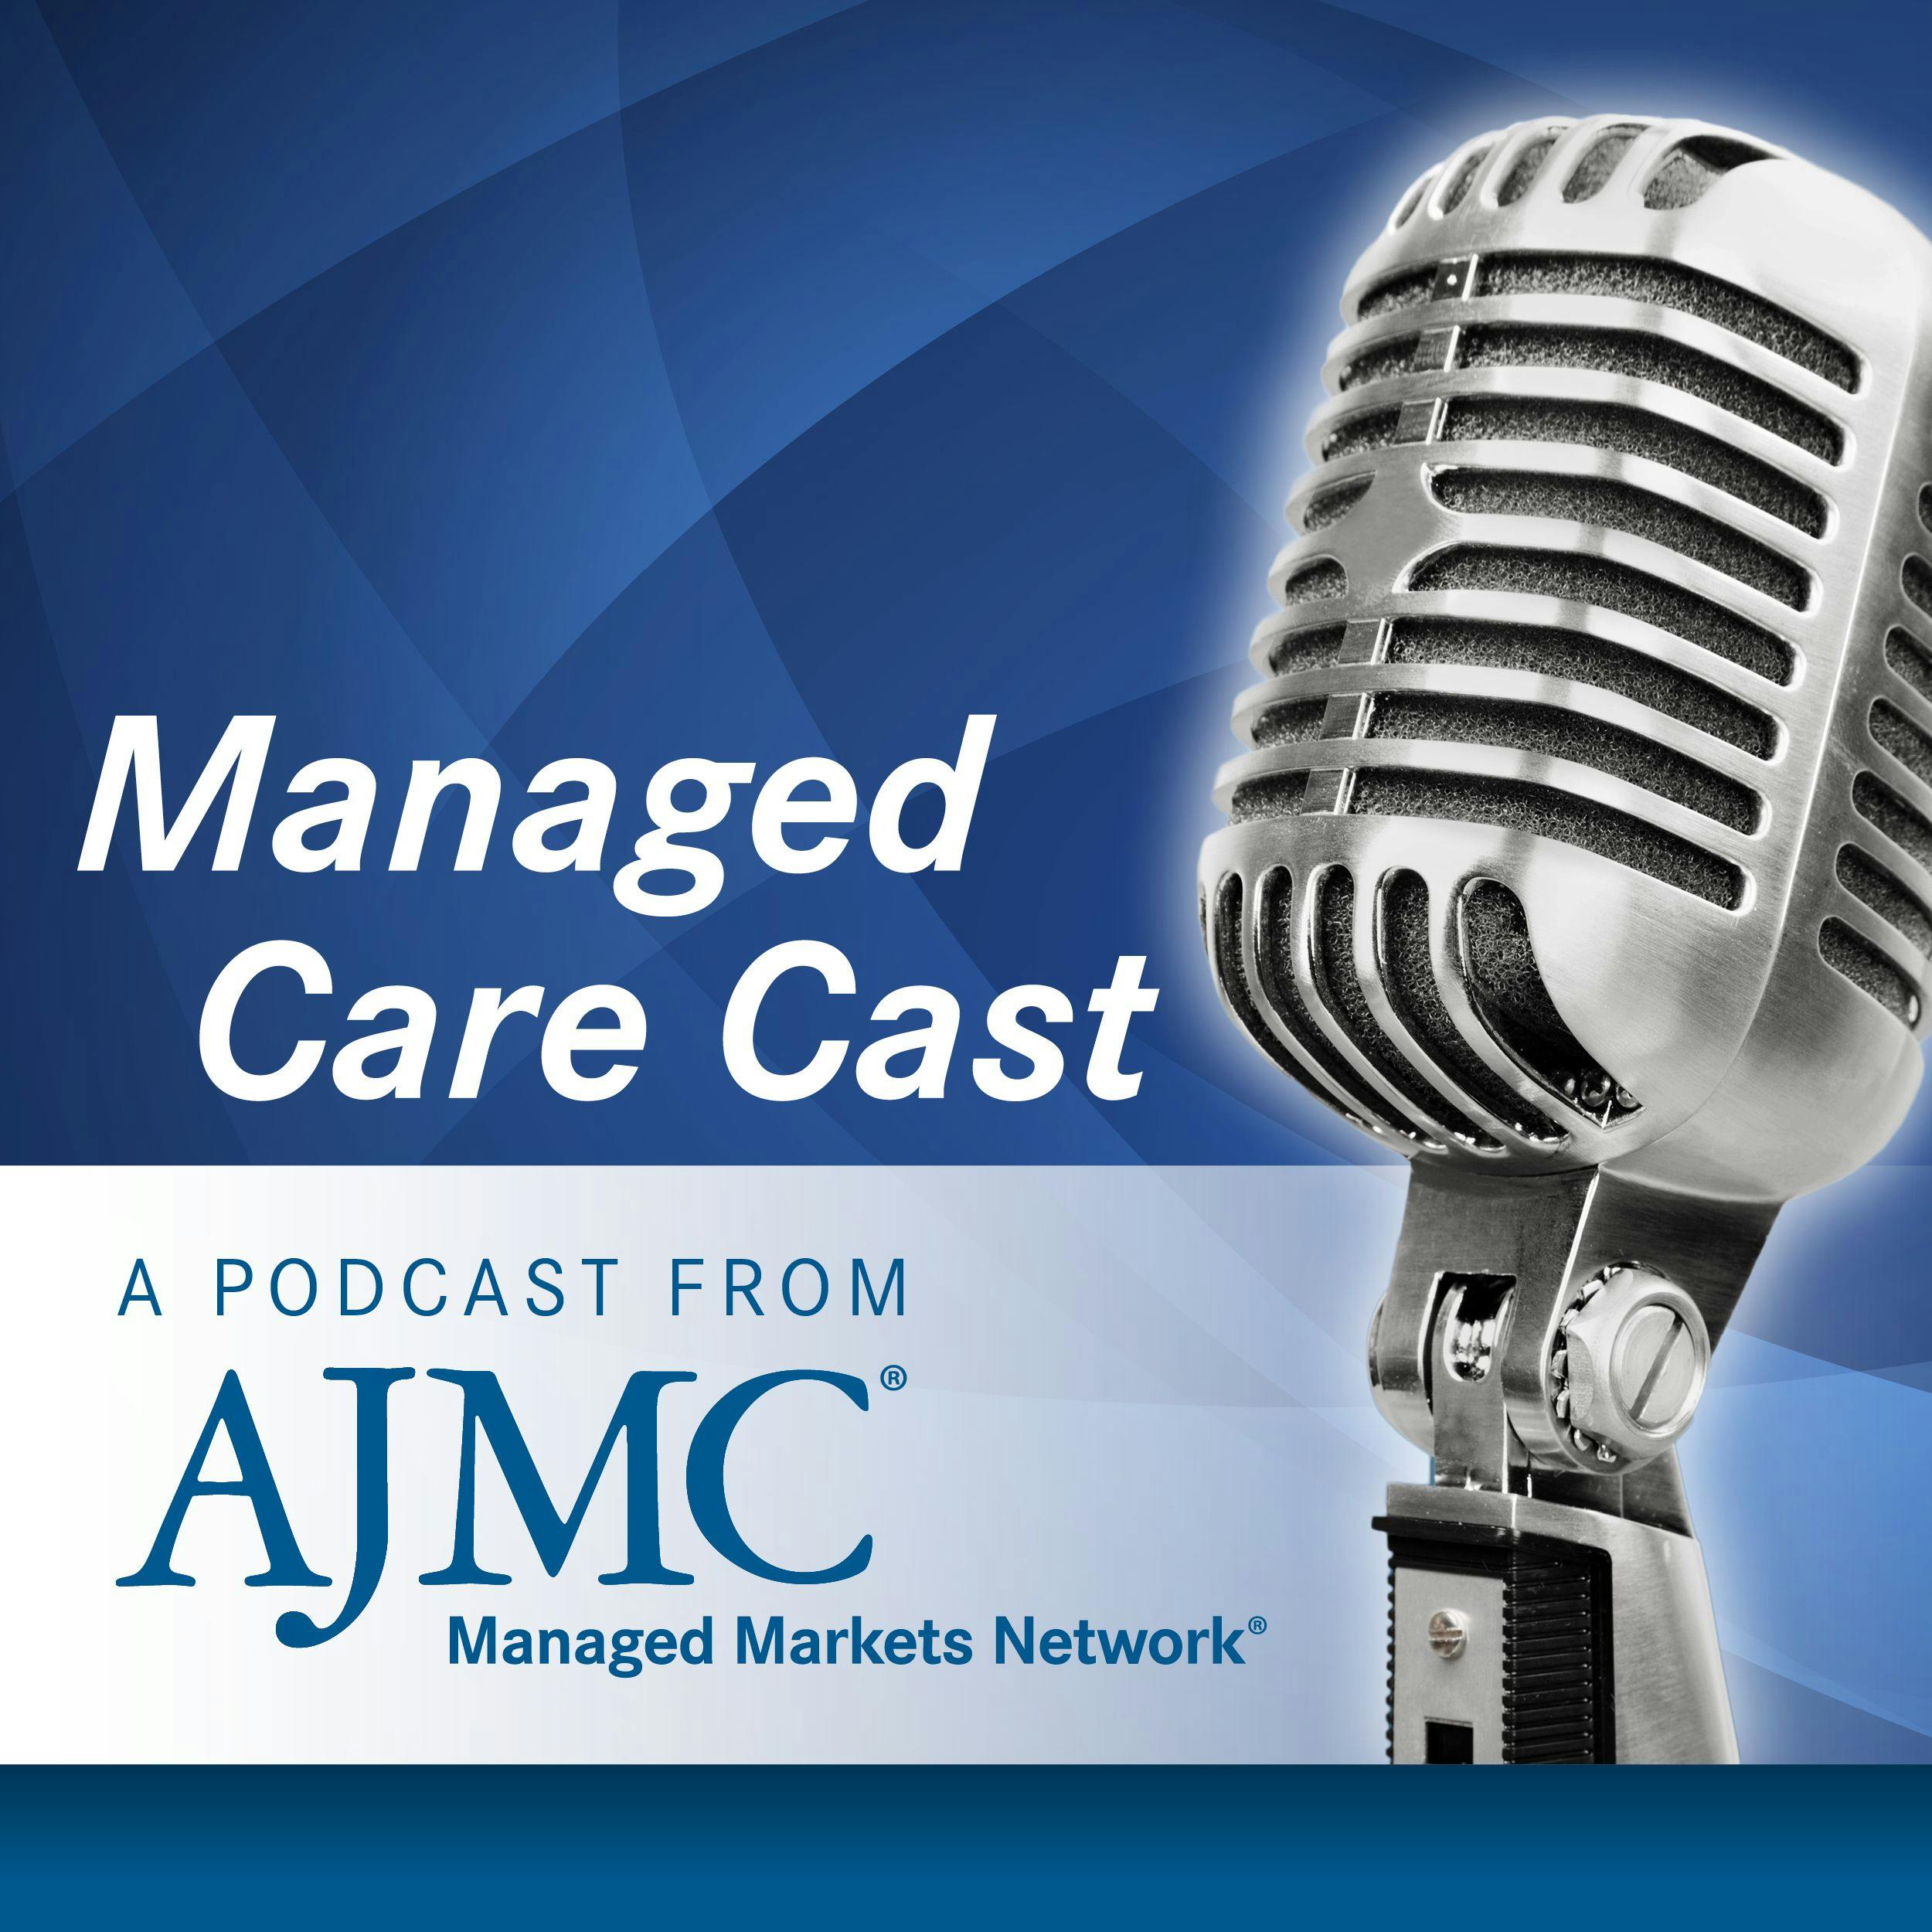 Managed Care Cast: A Podcast From AJMC